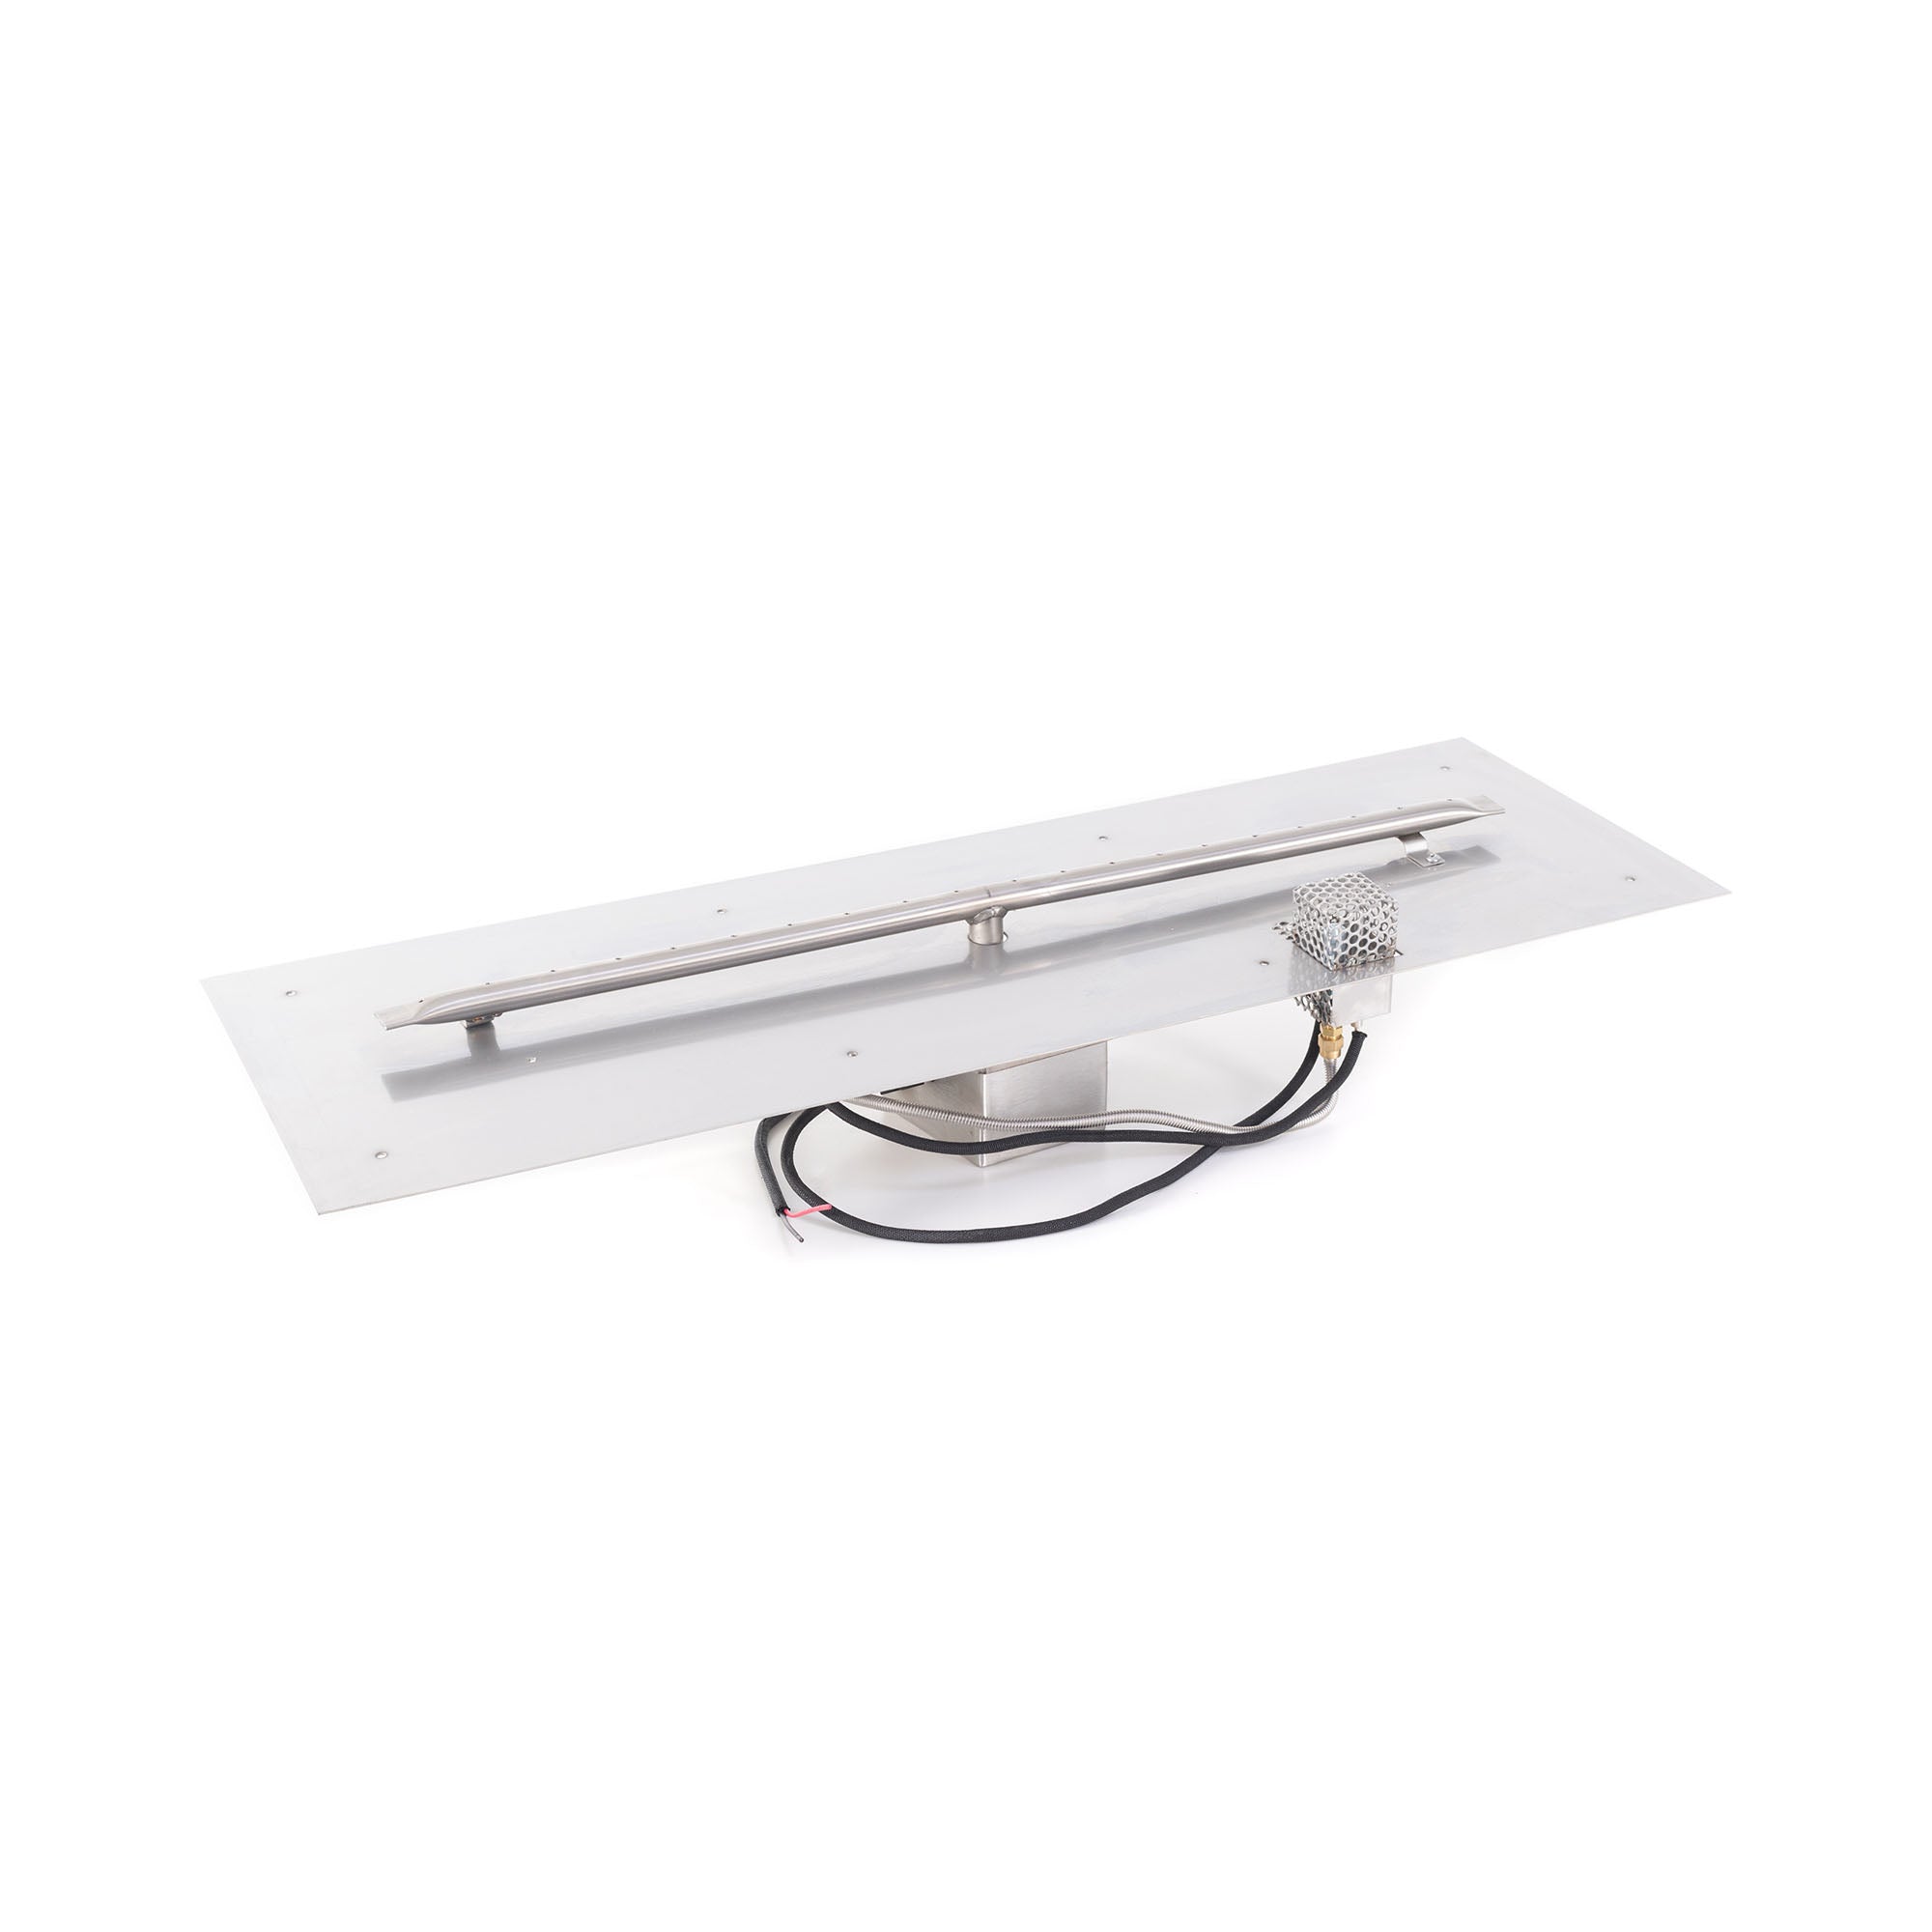 The Outdoor Plus - 60 Inch Rectangular Stainless Steel Flat Pan and 48 Inch Linear Burner - OPT-REFS860